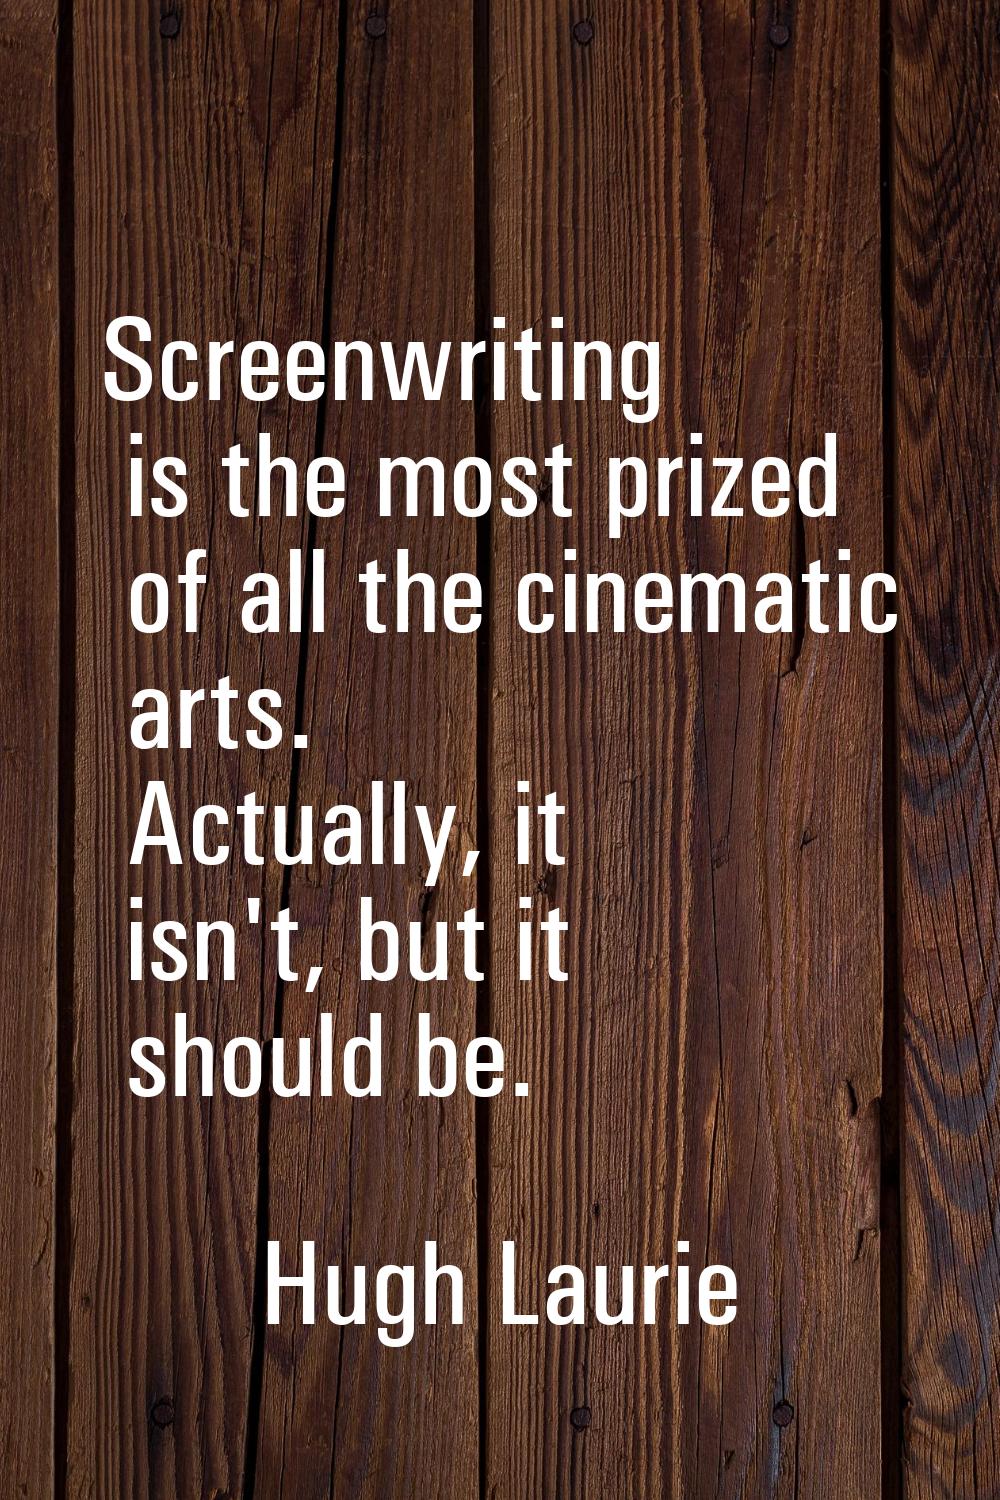 Screenwriting is the most prized of all the cinematic arts. Actually, it isn't, but it should be.